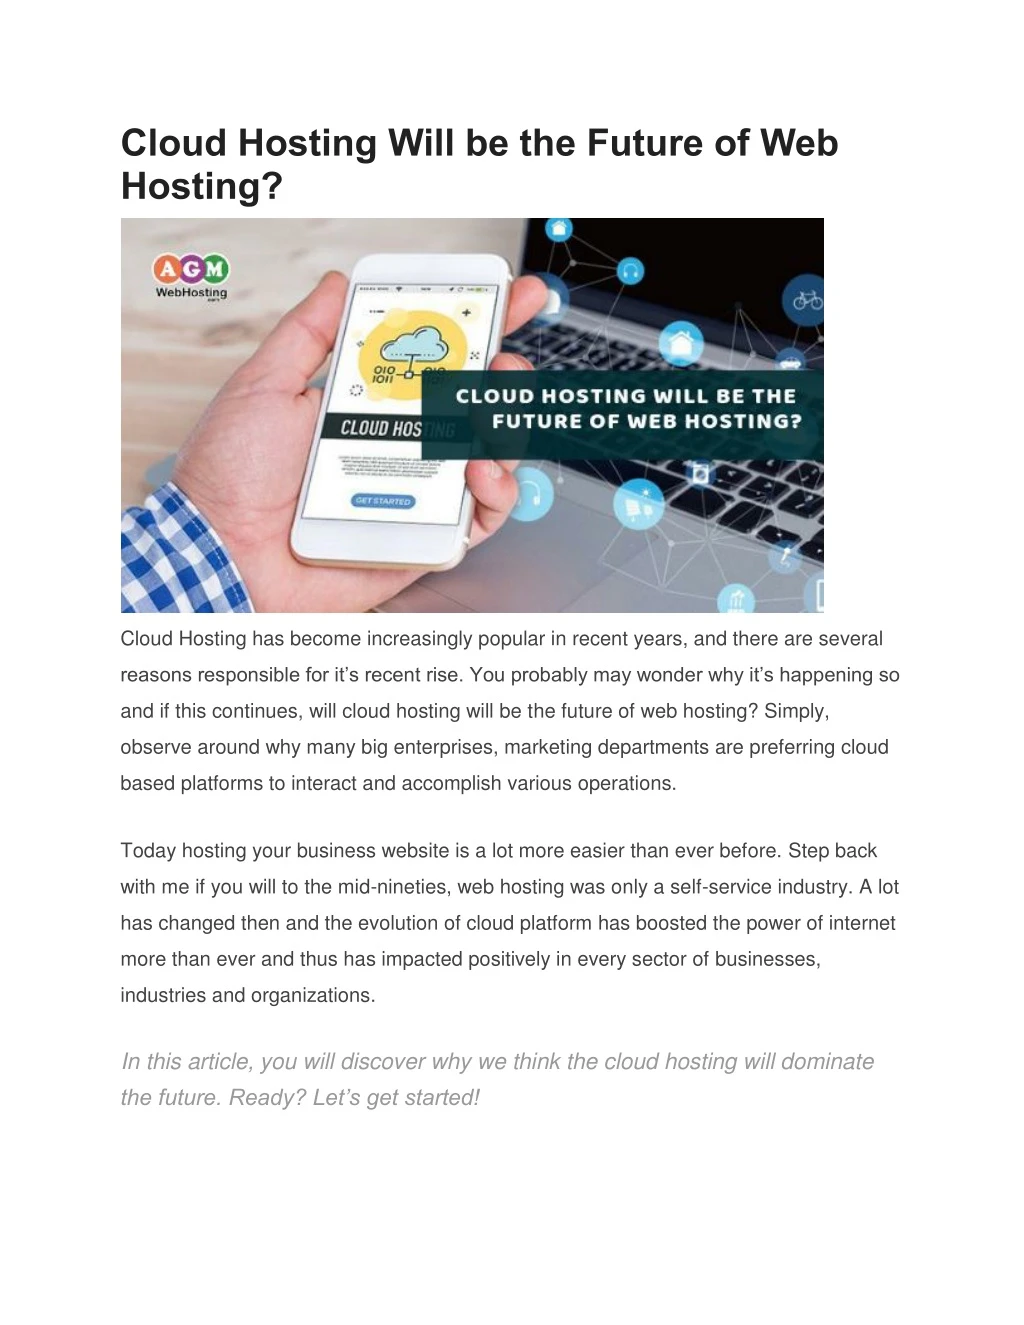 cloud hosting will be the future of web hosting